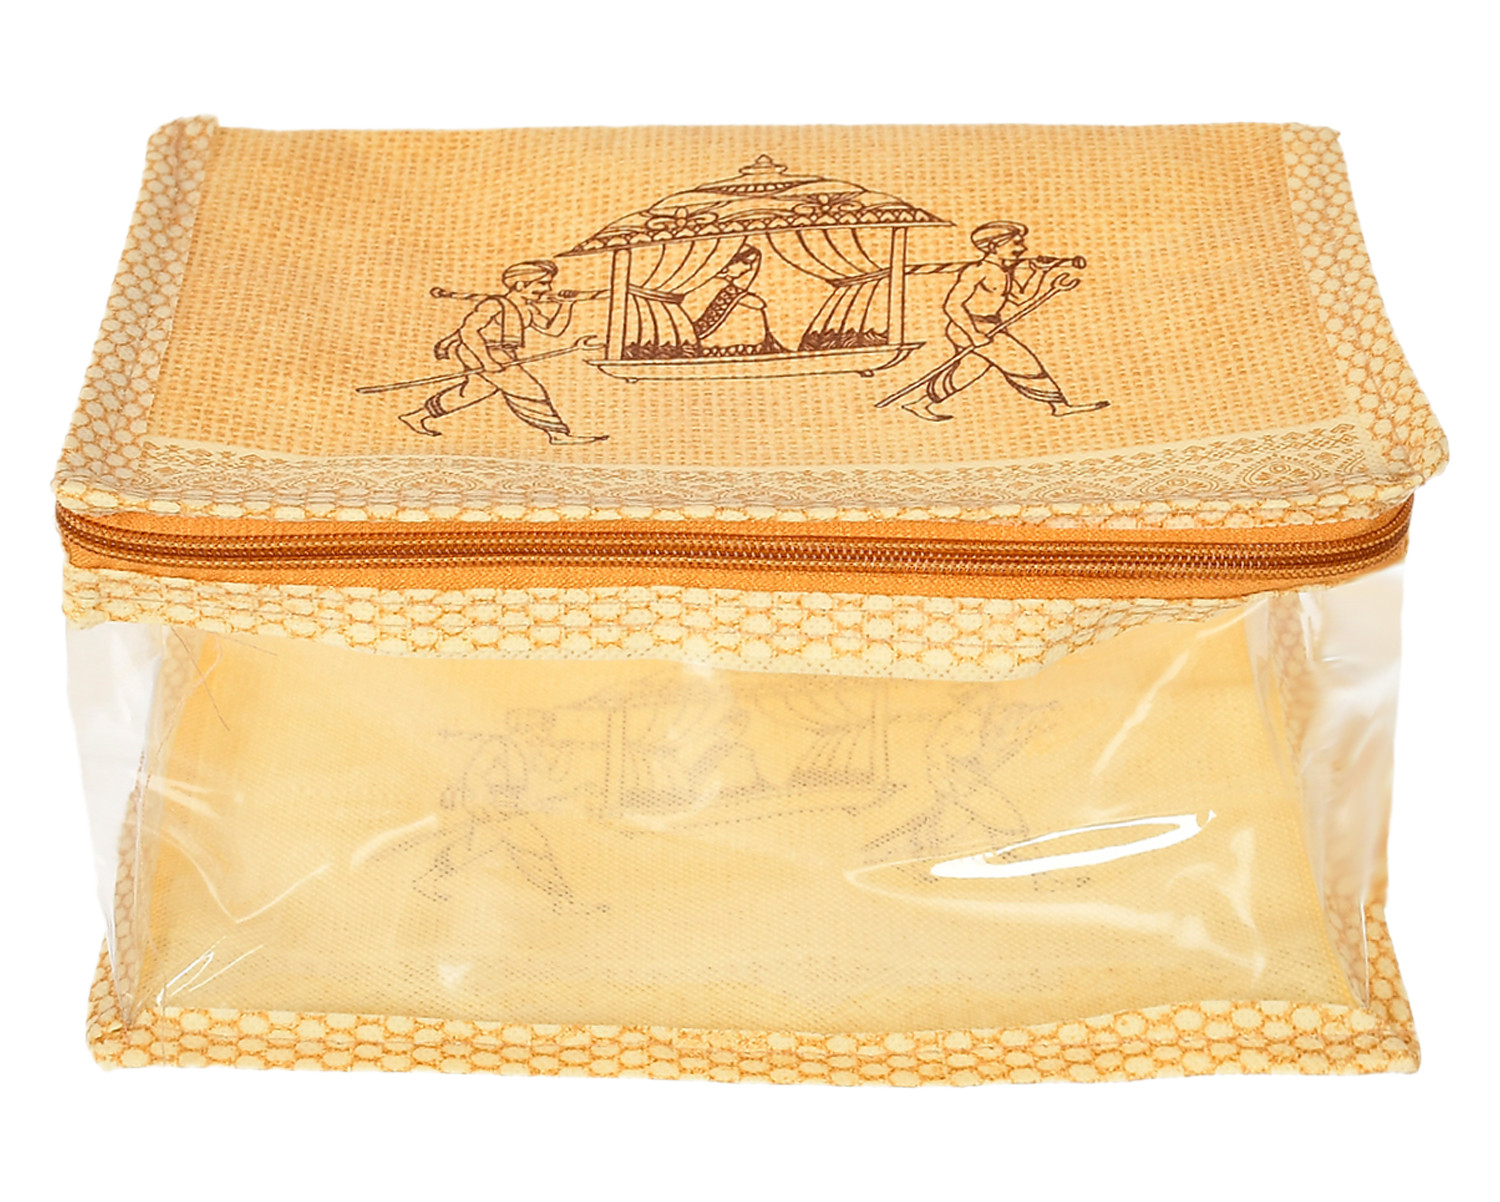 Kuber Industries Doli Printed Multiuses Non-Woven Makeup/Jewellery Organizer Bag, Travel Toiletry Pouch,(Gold) 54KM4285